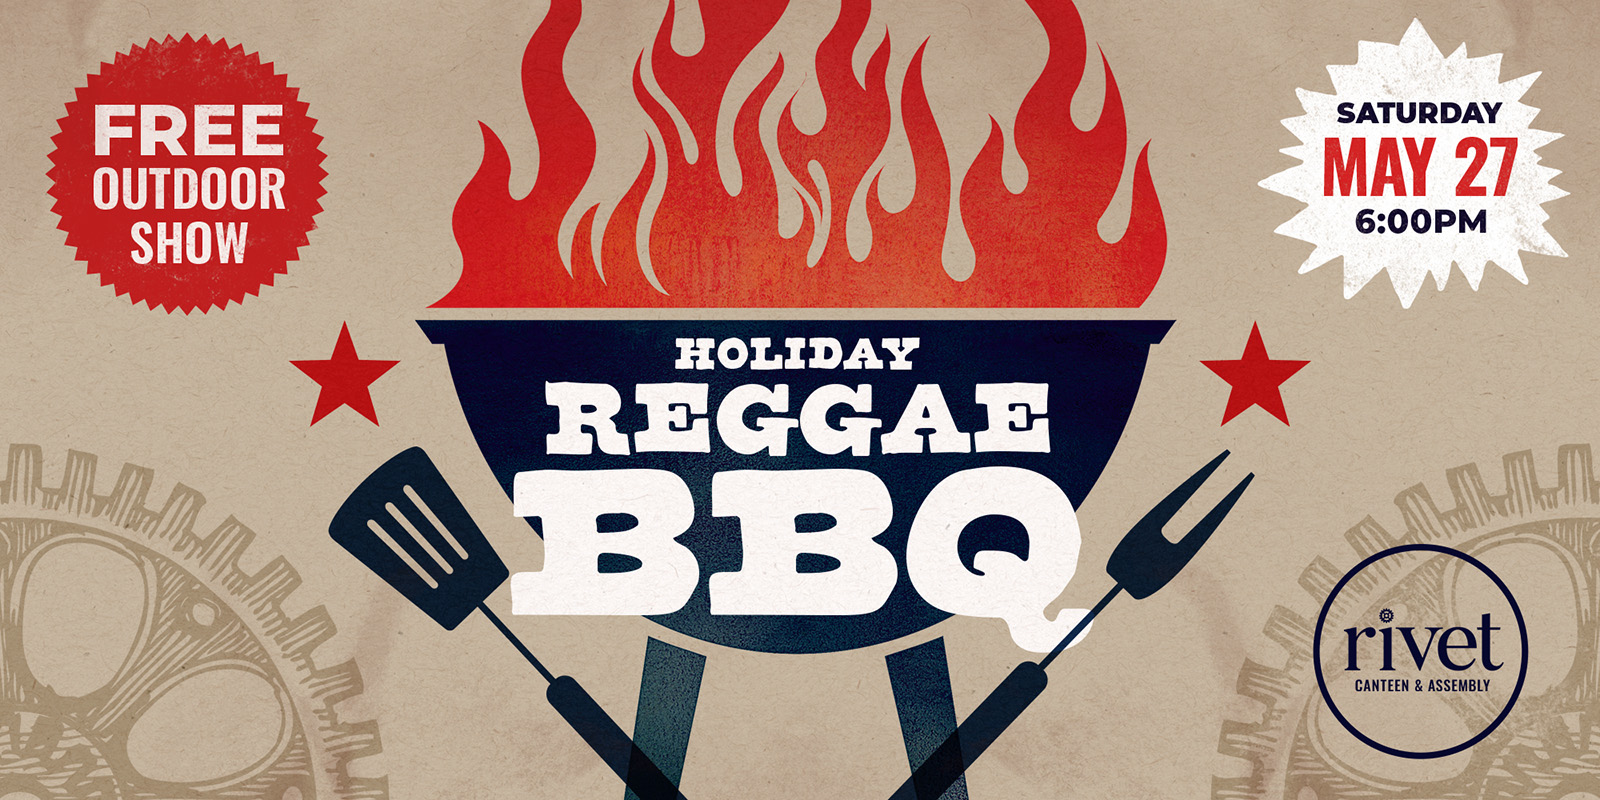 Memorial Day Weekend Holiday Reggae BBQ at Rivet: Canteen & Assembly on Saturday, May 27th, 2023. Bring your friends and family out for an amazing event you do not want to miss! Free to attend!